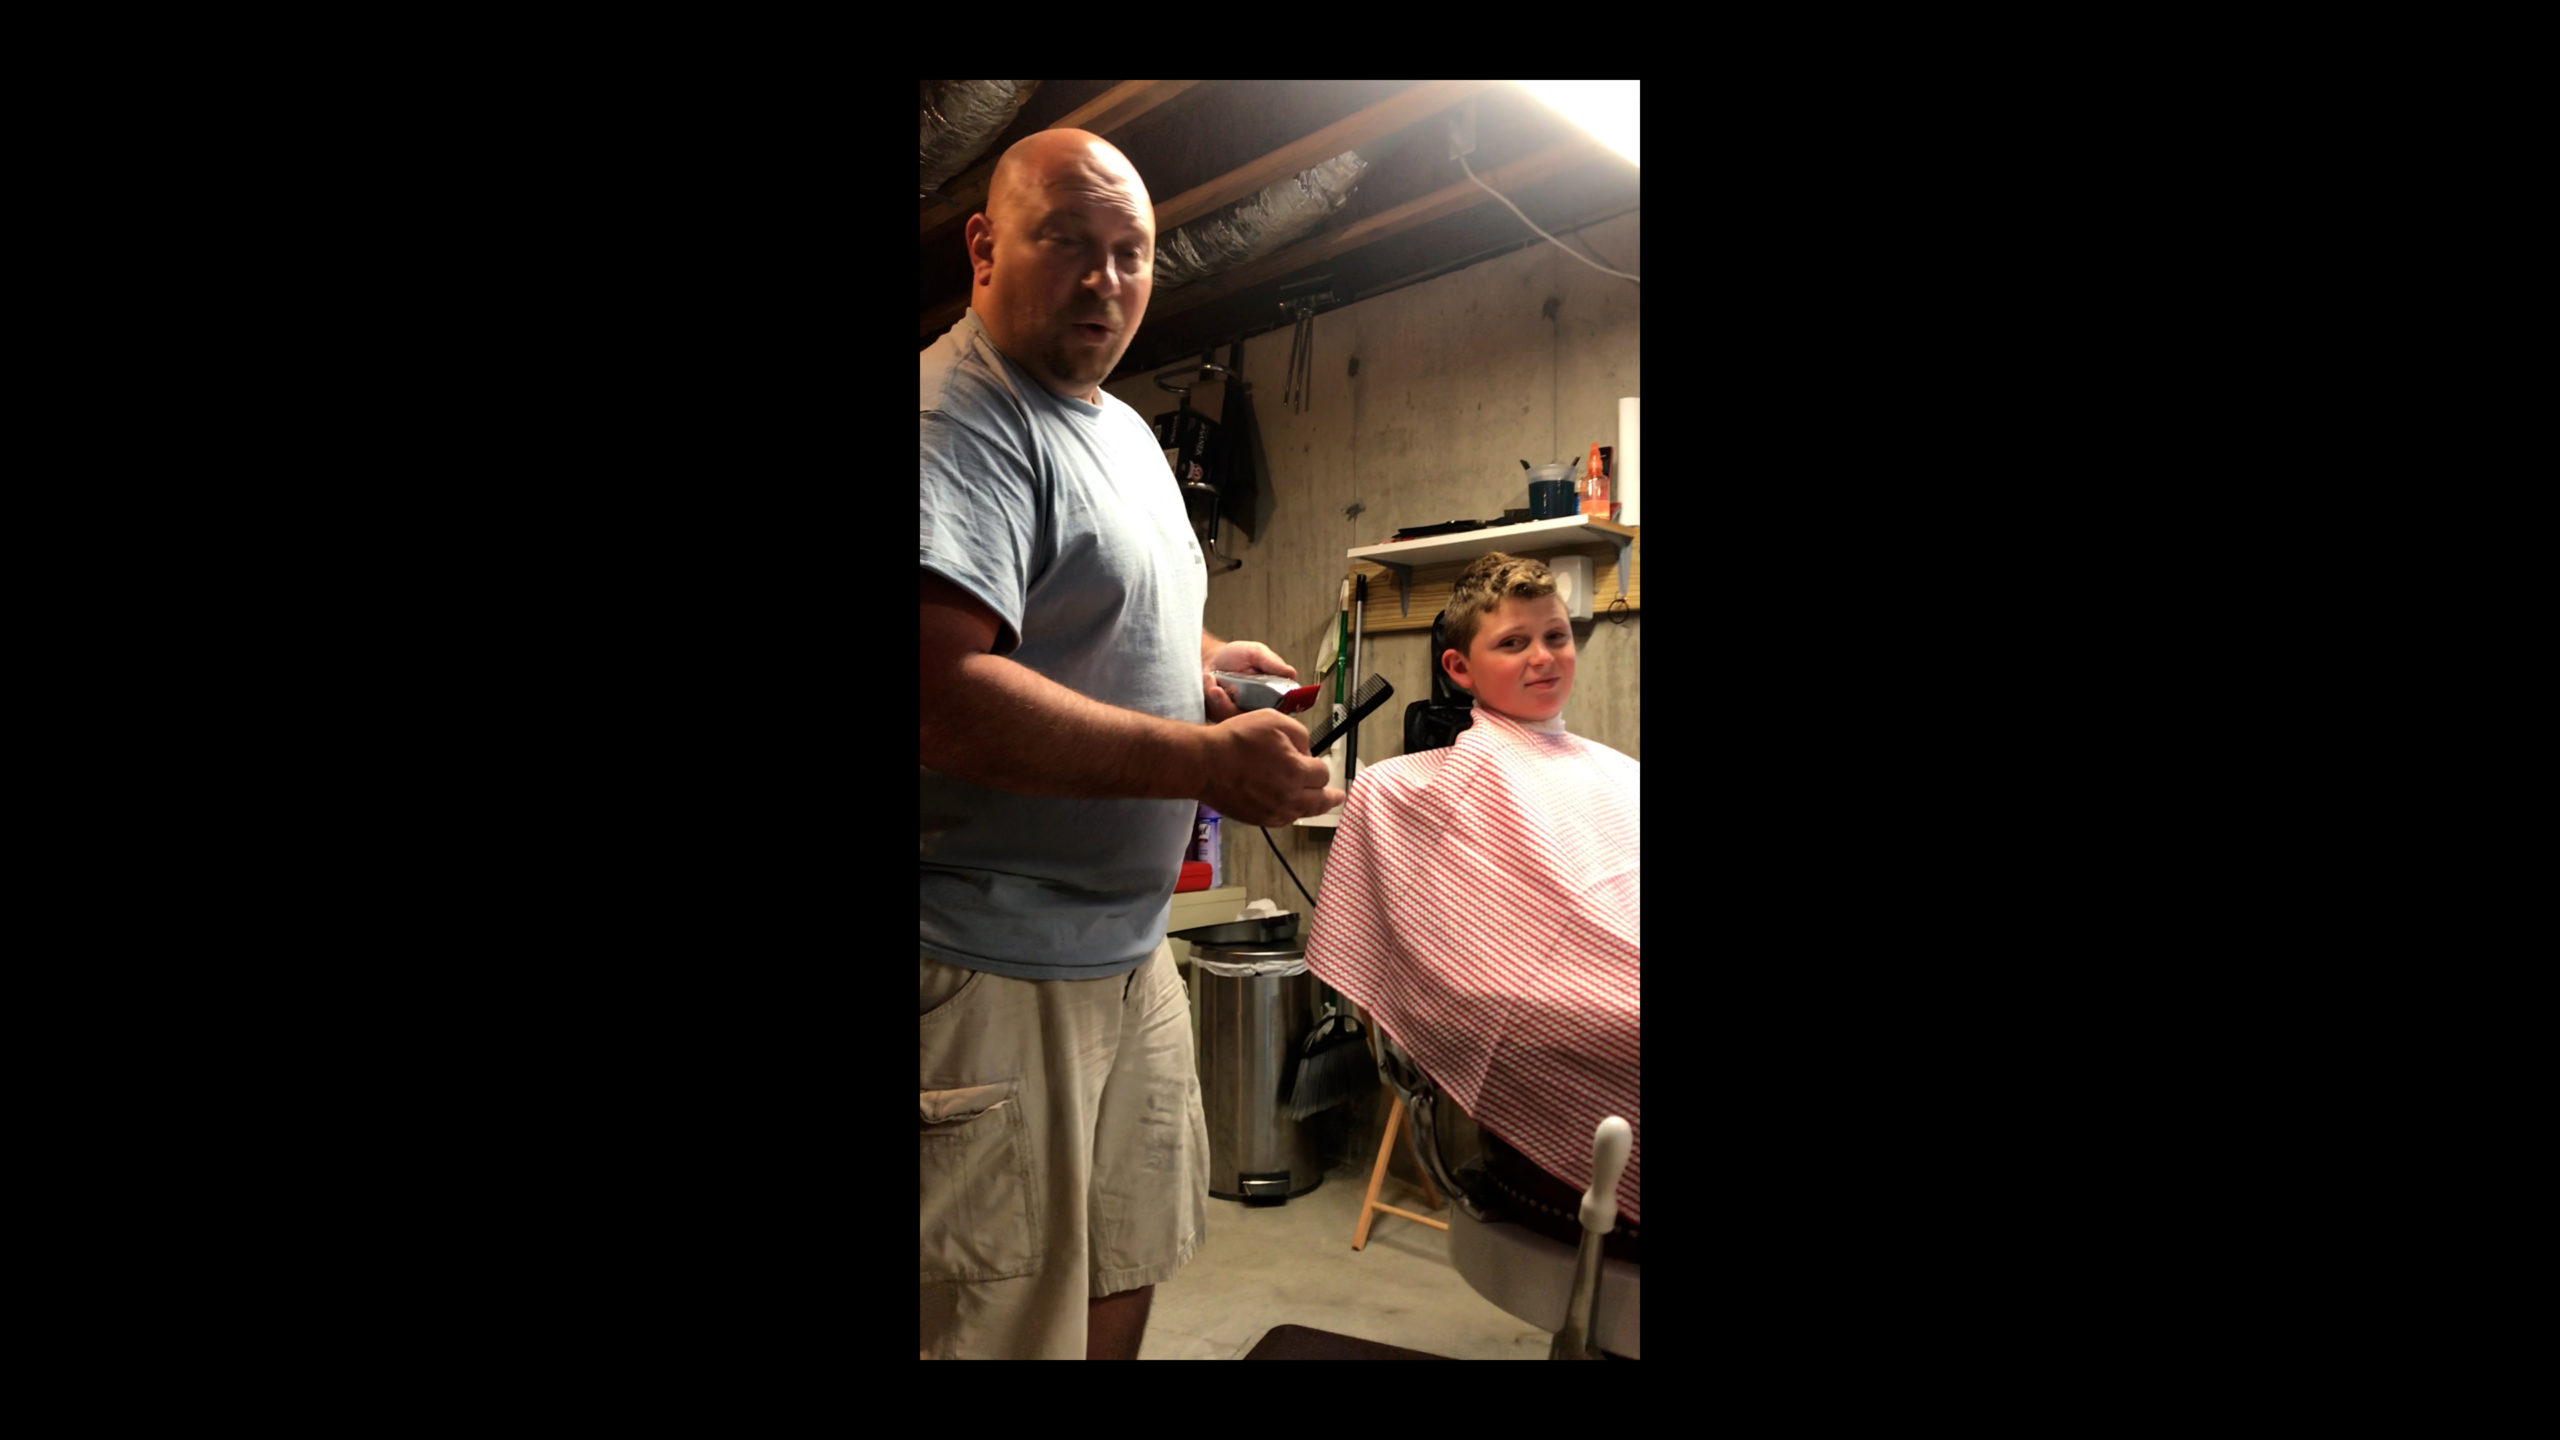 Nick Mazzeo gives a home haircut to Dominic Mazzeo.